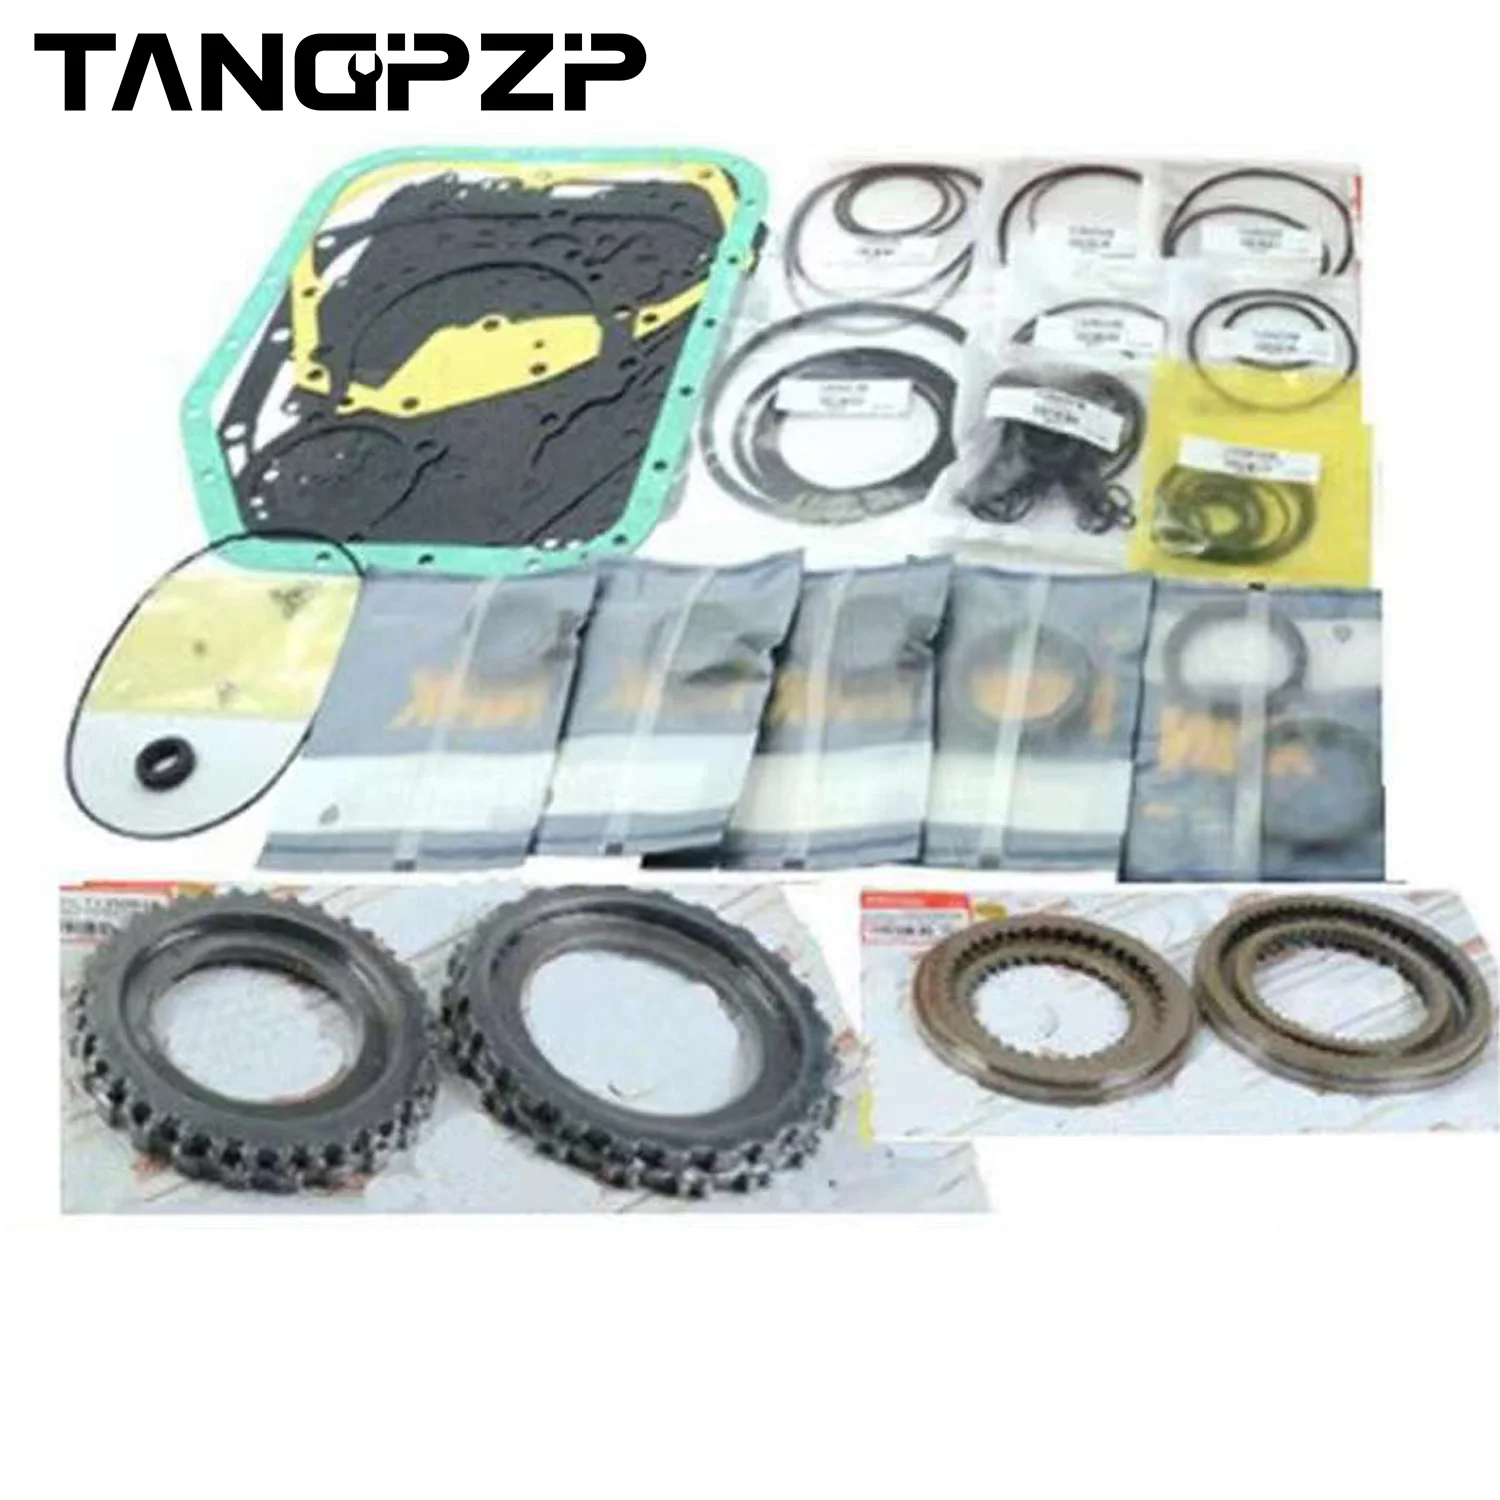 

5EAT Automatic Transmission Clutch Repair Kit Frictions Gaskets Sealing Rings For SUBARU Legacy Outback Tribeca 5-SPEED